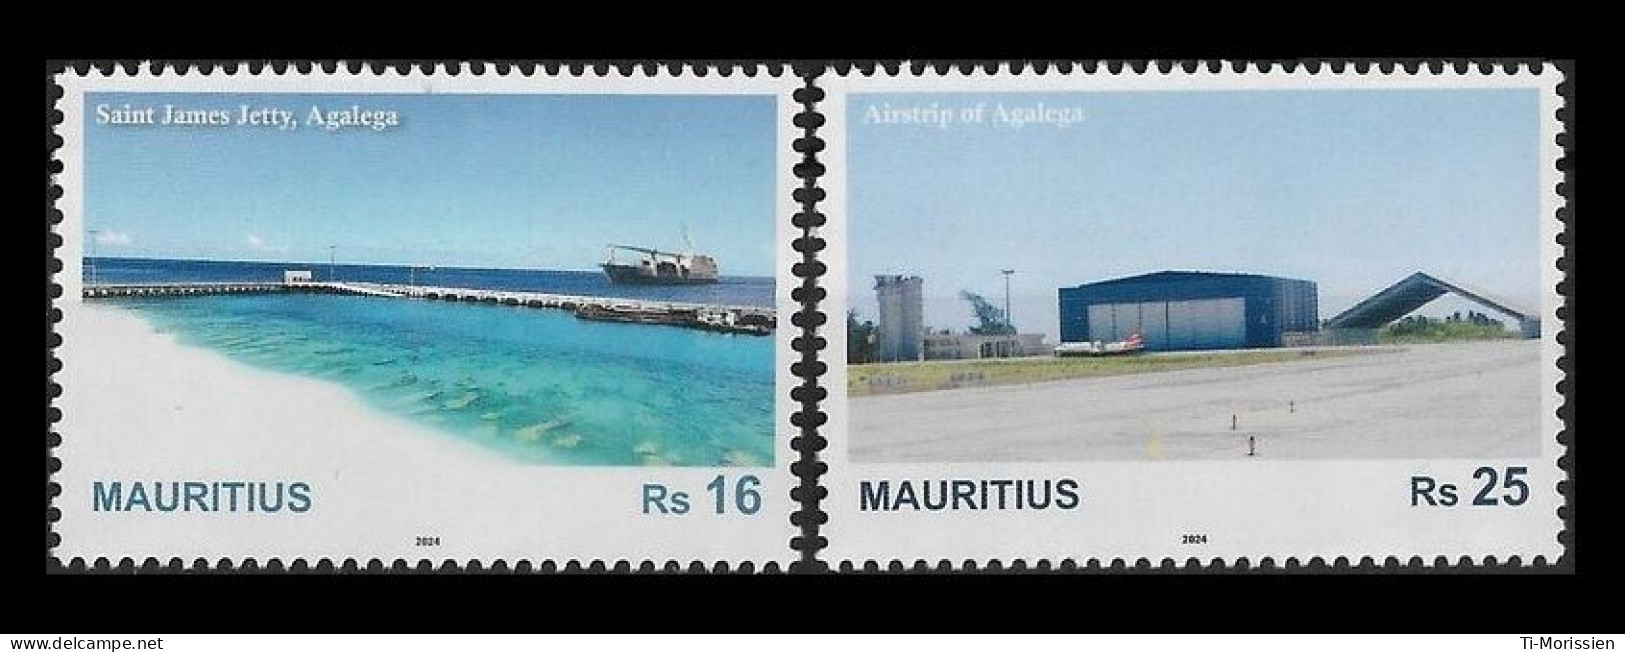 Mauritius(Ile Maurice) 2024 - Inauguration Of Airstrip And Saint James Jetty Of Agalega - 2v MNH Complete Set - Maurice (1968-...)